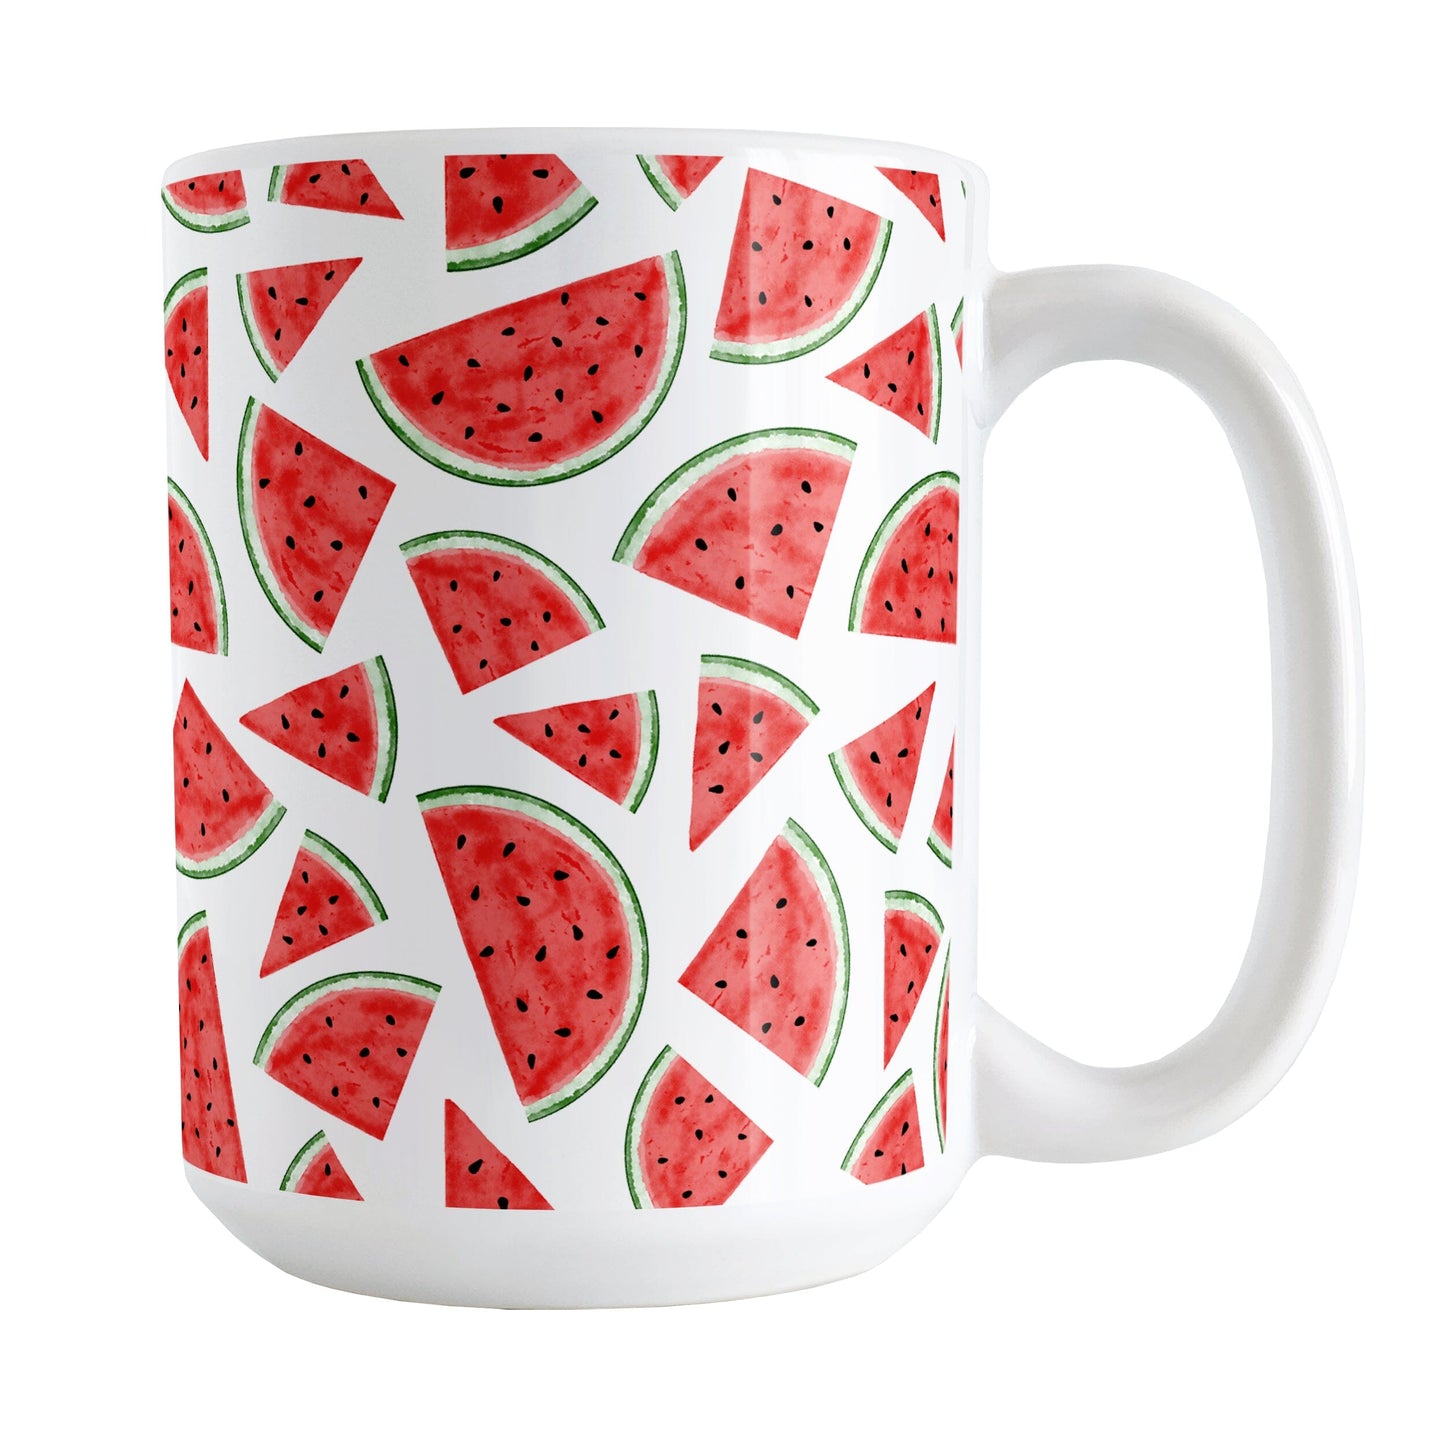 Watermelon Slices Mug (15oz) at Amy's Coffee Mugs. A ceramic coffee mug designed with a pattern of illustrated watermelon slices that wraps around the mug to the handle.